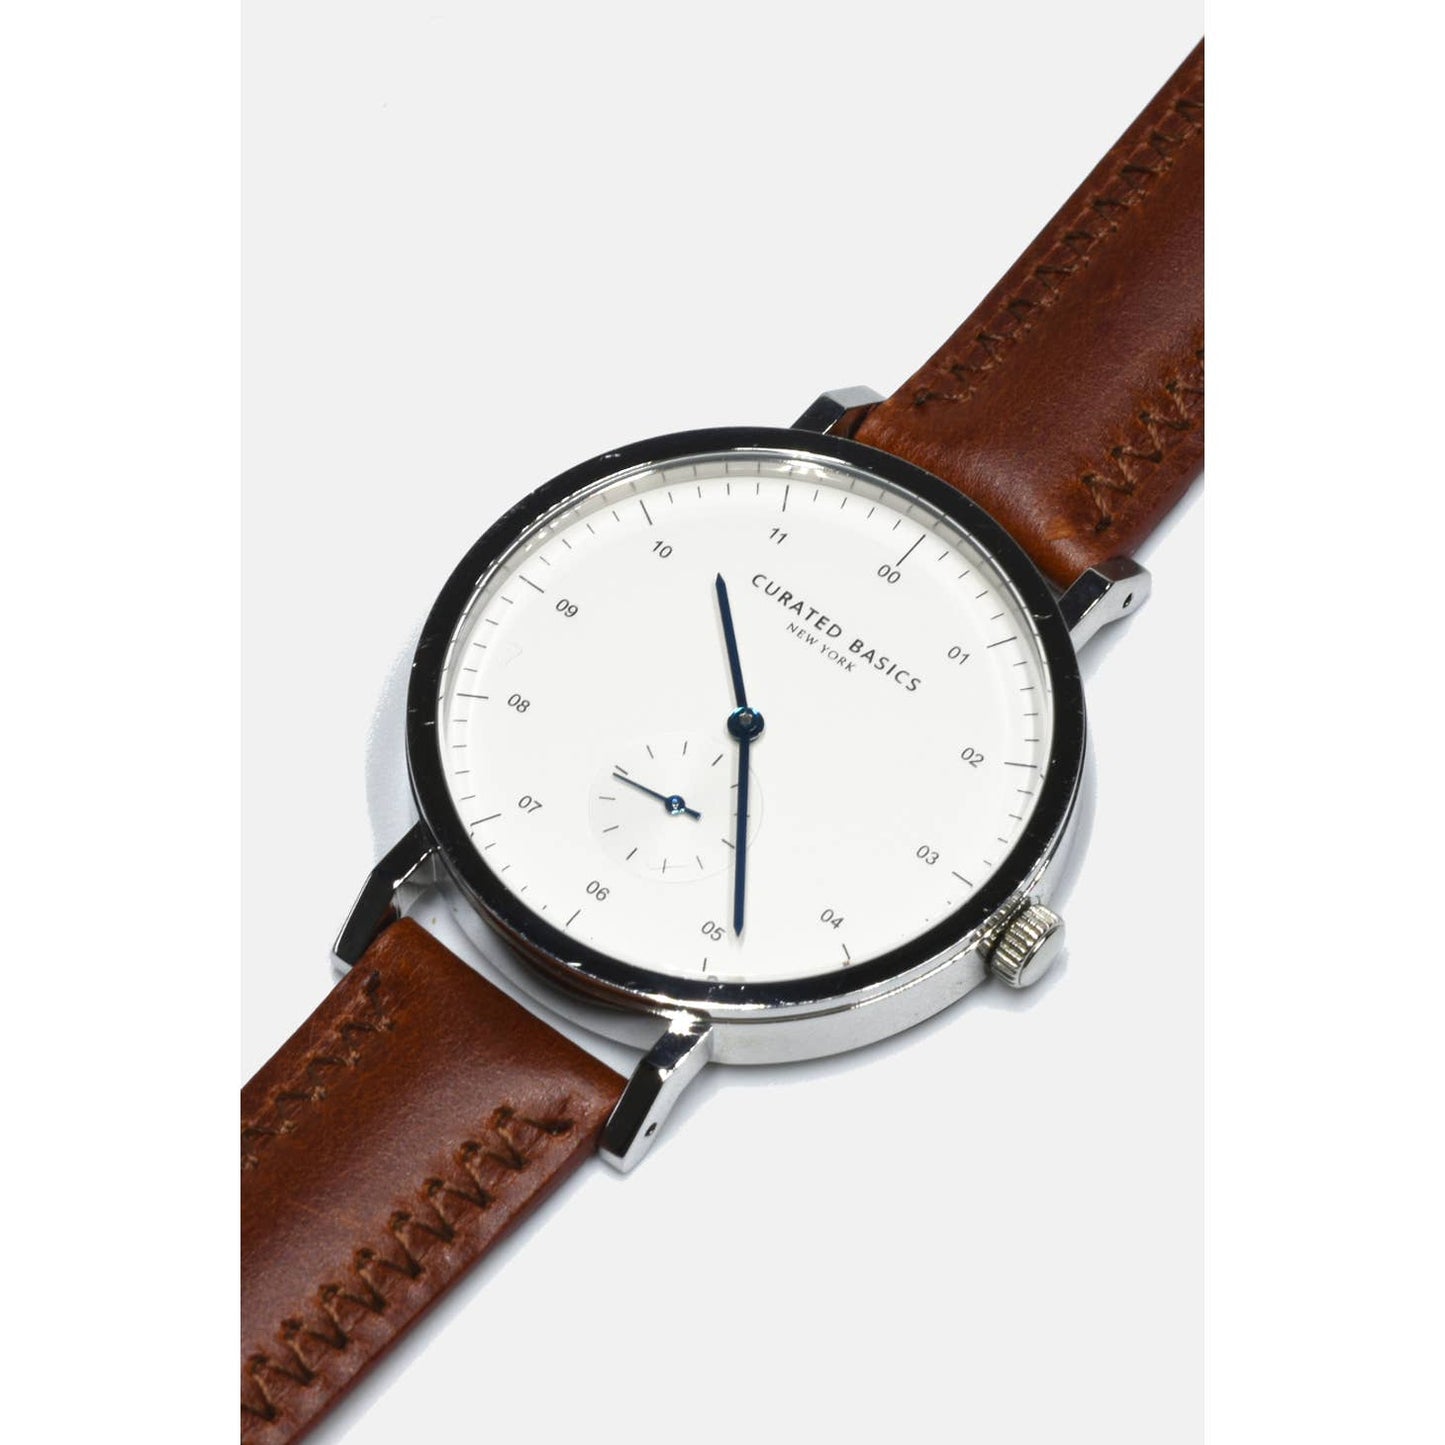 The Oliver Watch